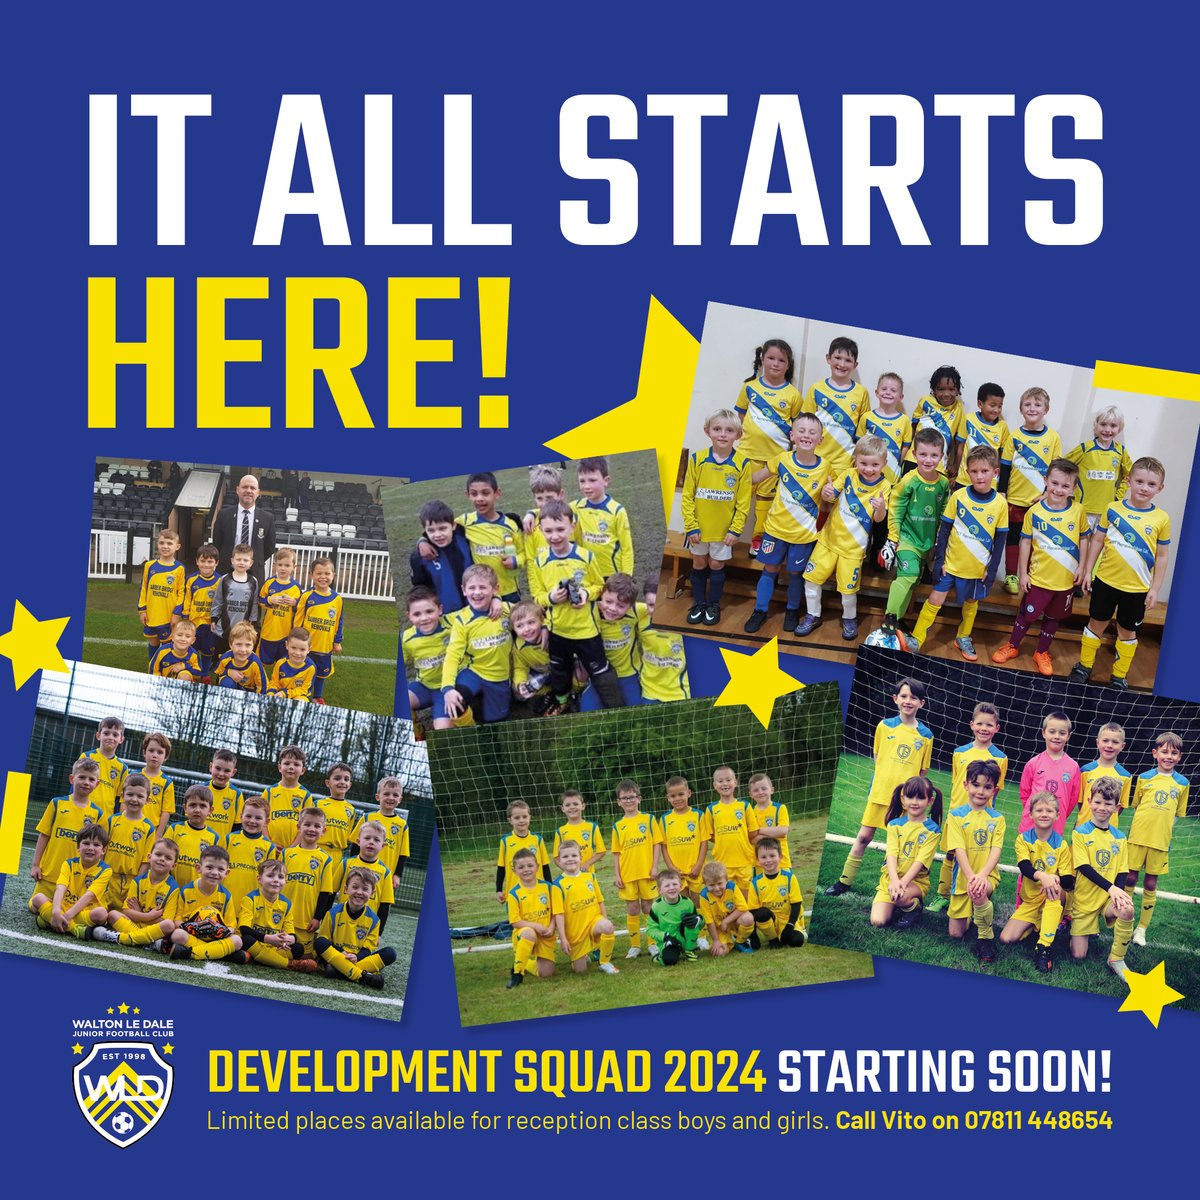 IT ALL STARTS HERE! Details of our 2024 Development Squad sessions will be confirmed VERY soon. Places are limited, so if you have a reception class boy or girl looking to start their football journey, please register your interest today by contacting Vito on 07811 448654. 🌟⚽️